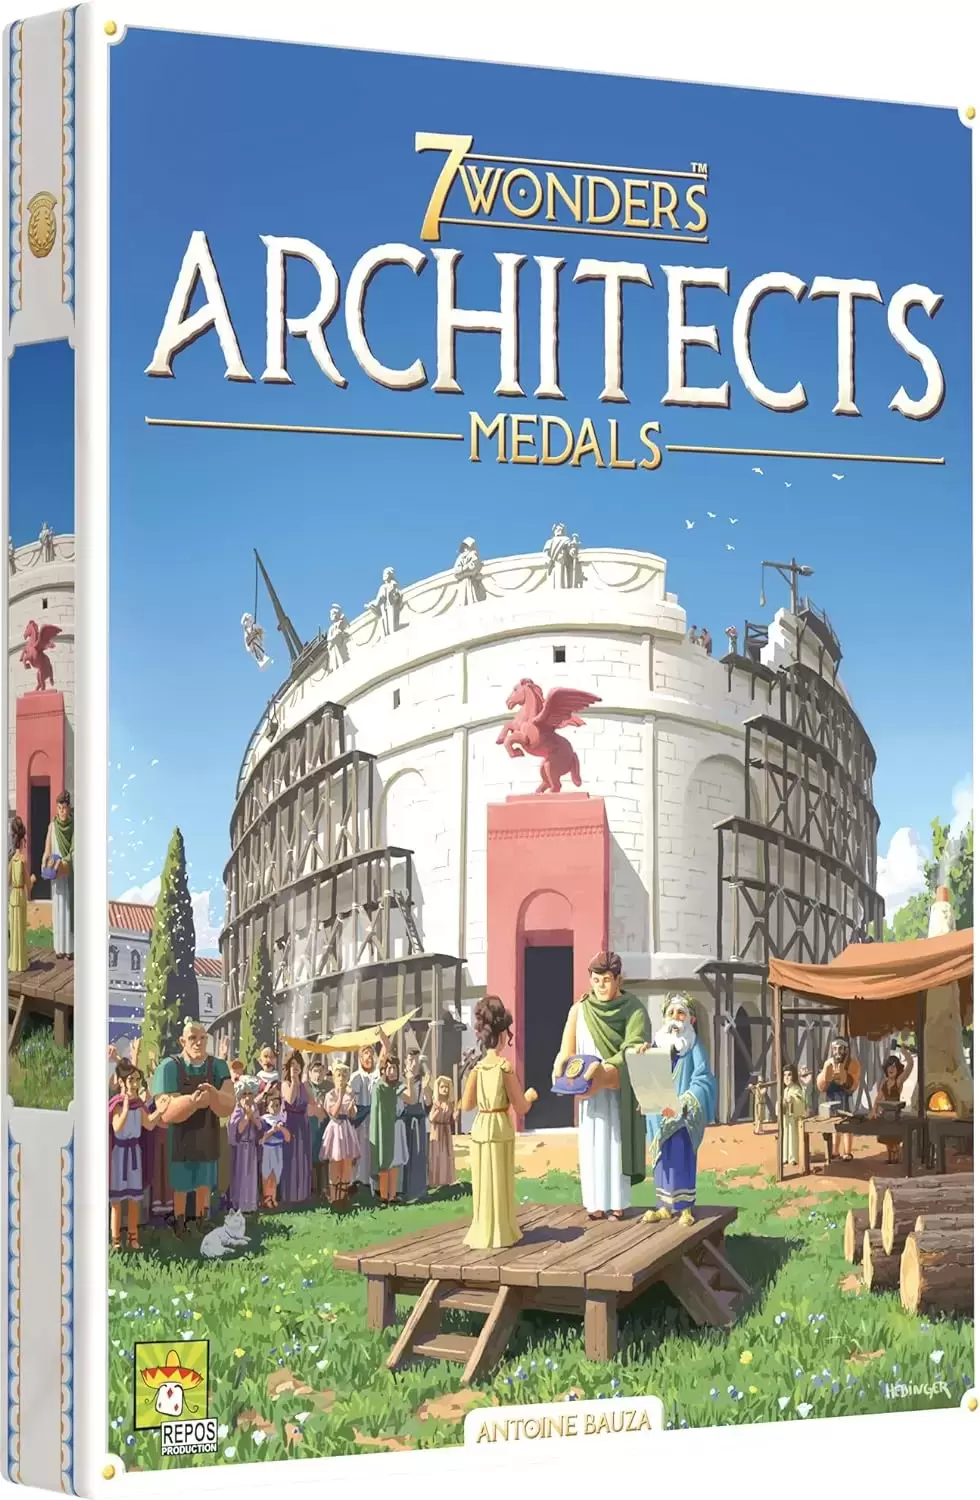 7 Wonders - 7 Wonders Architects : Medals Extension